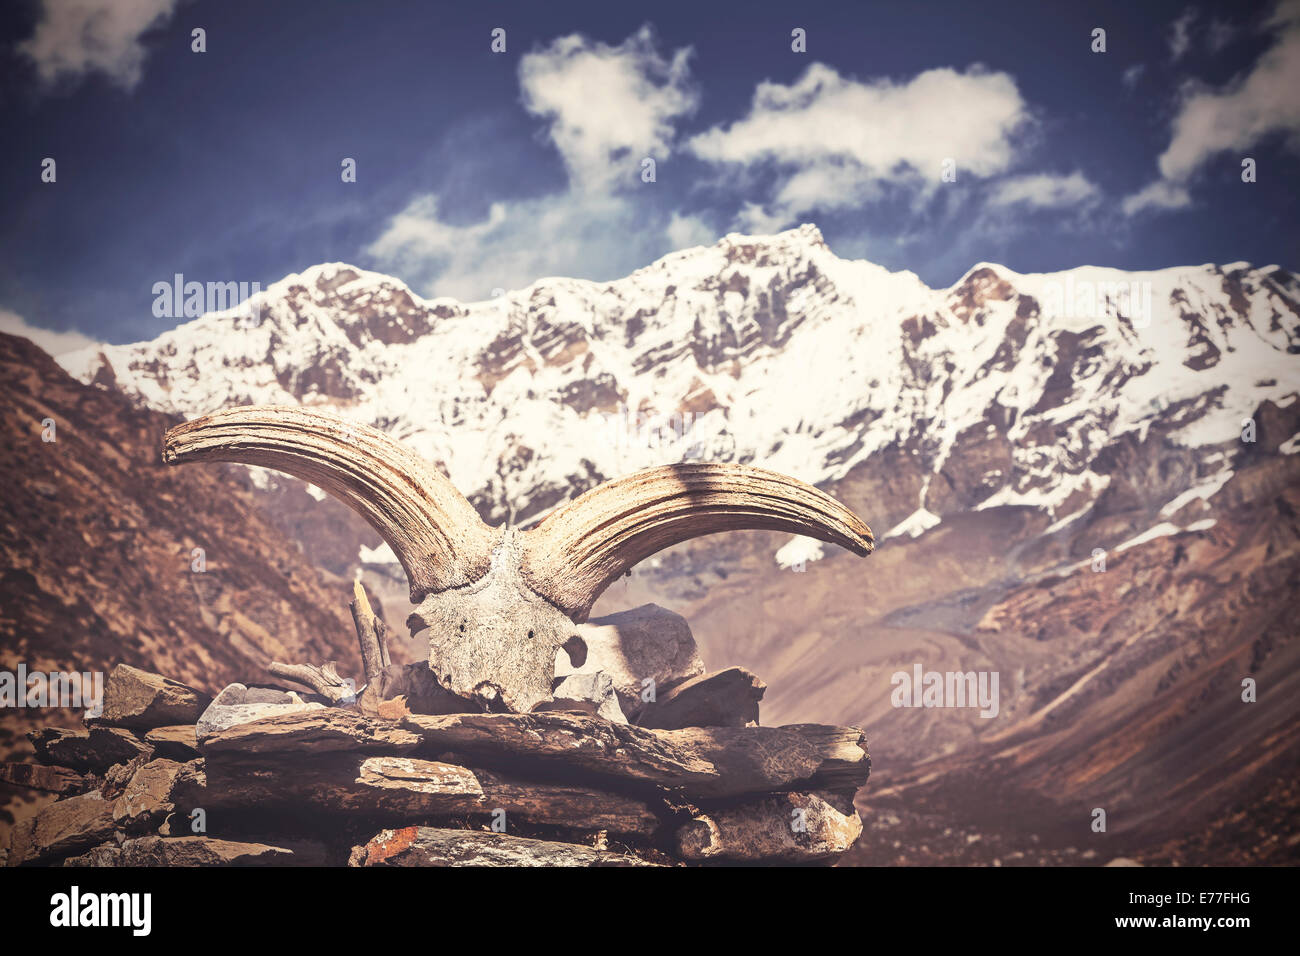 Vintage picture of yak's skull with Himalaya mountains in background, Nepal Stock Photo